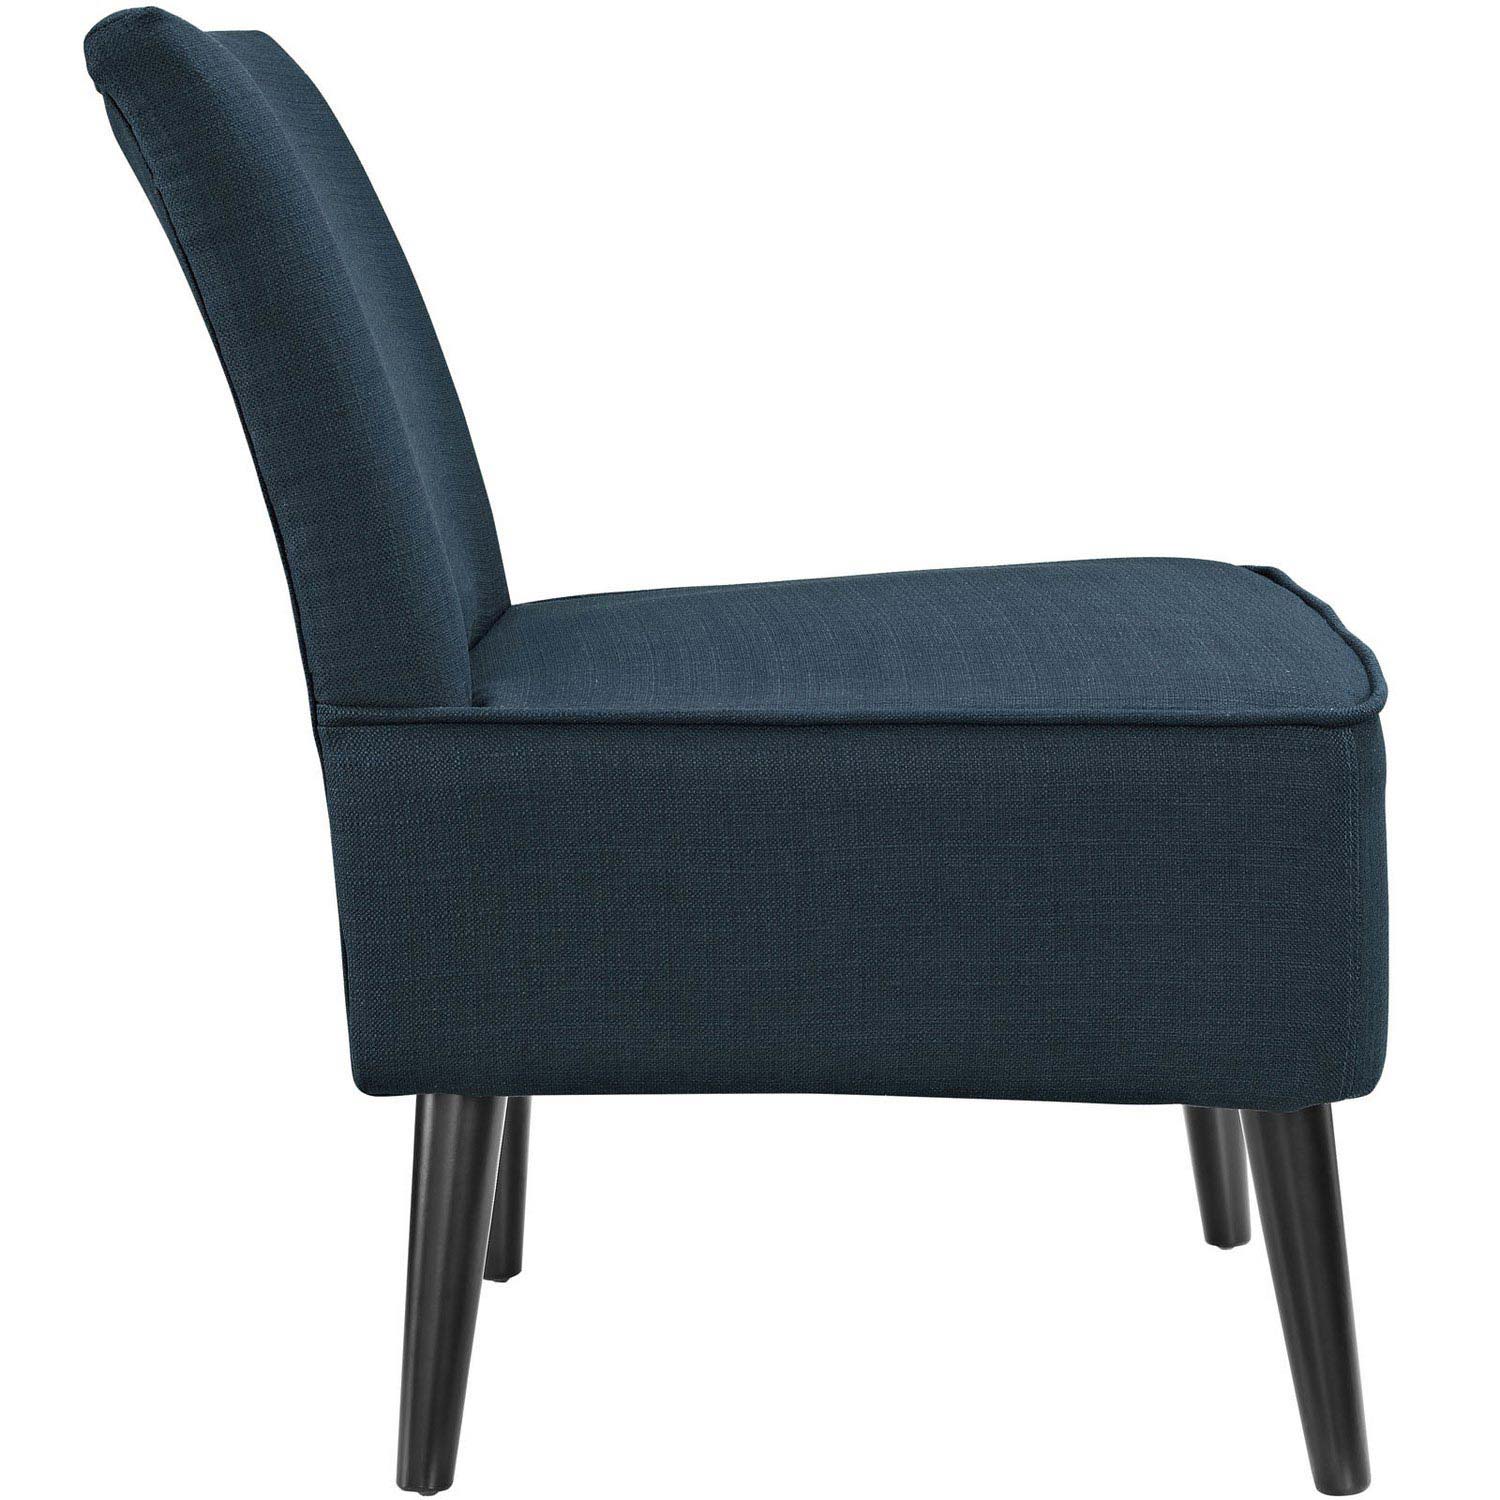 Modway Reef Fabric Side Chair - Azure